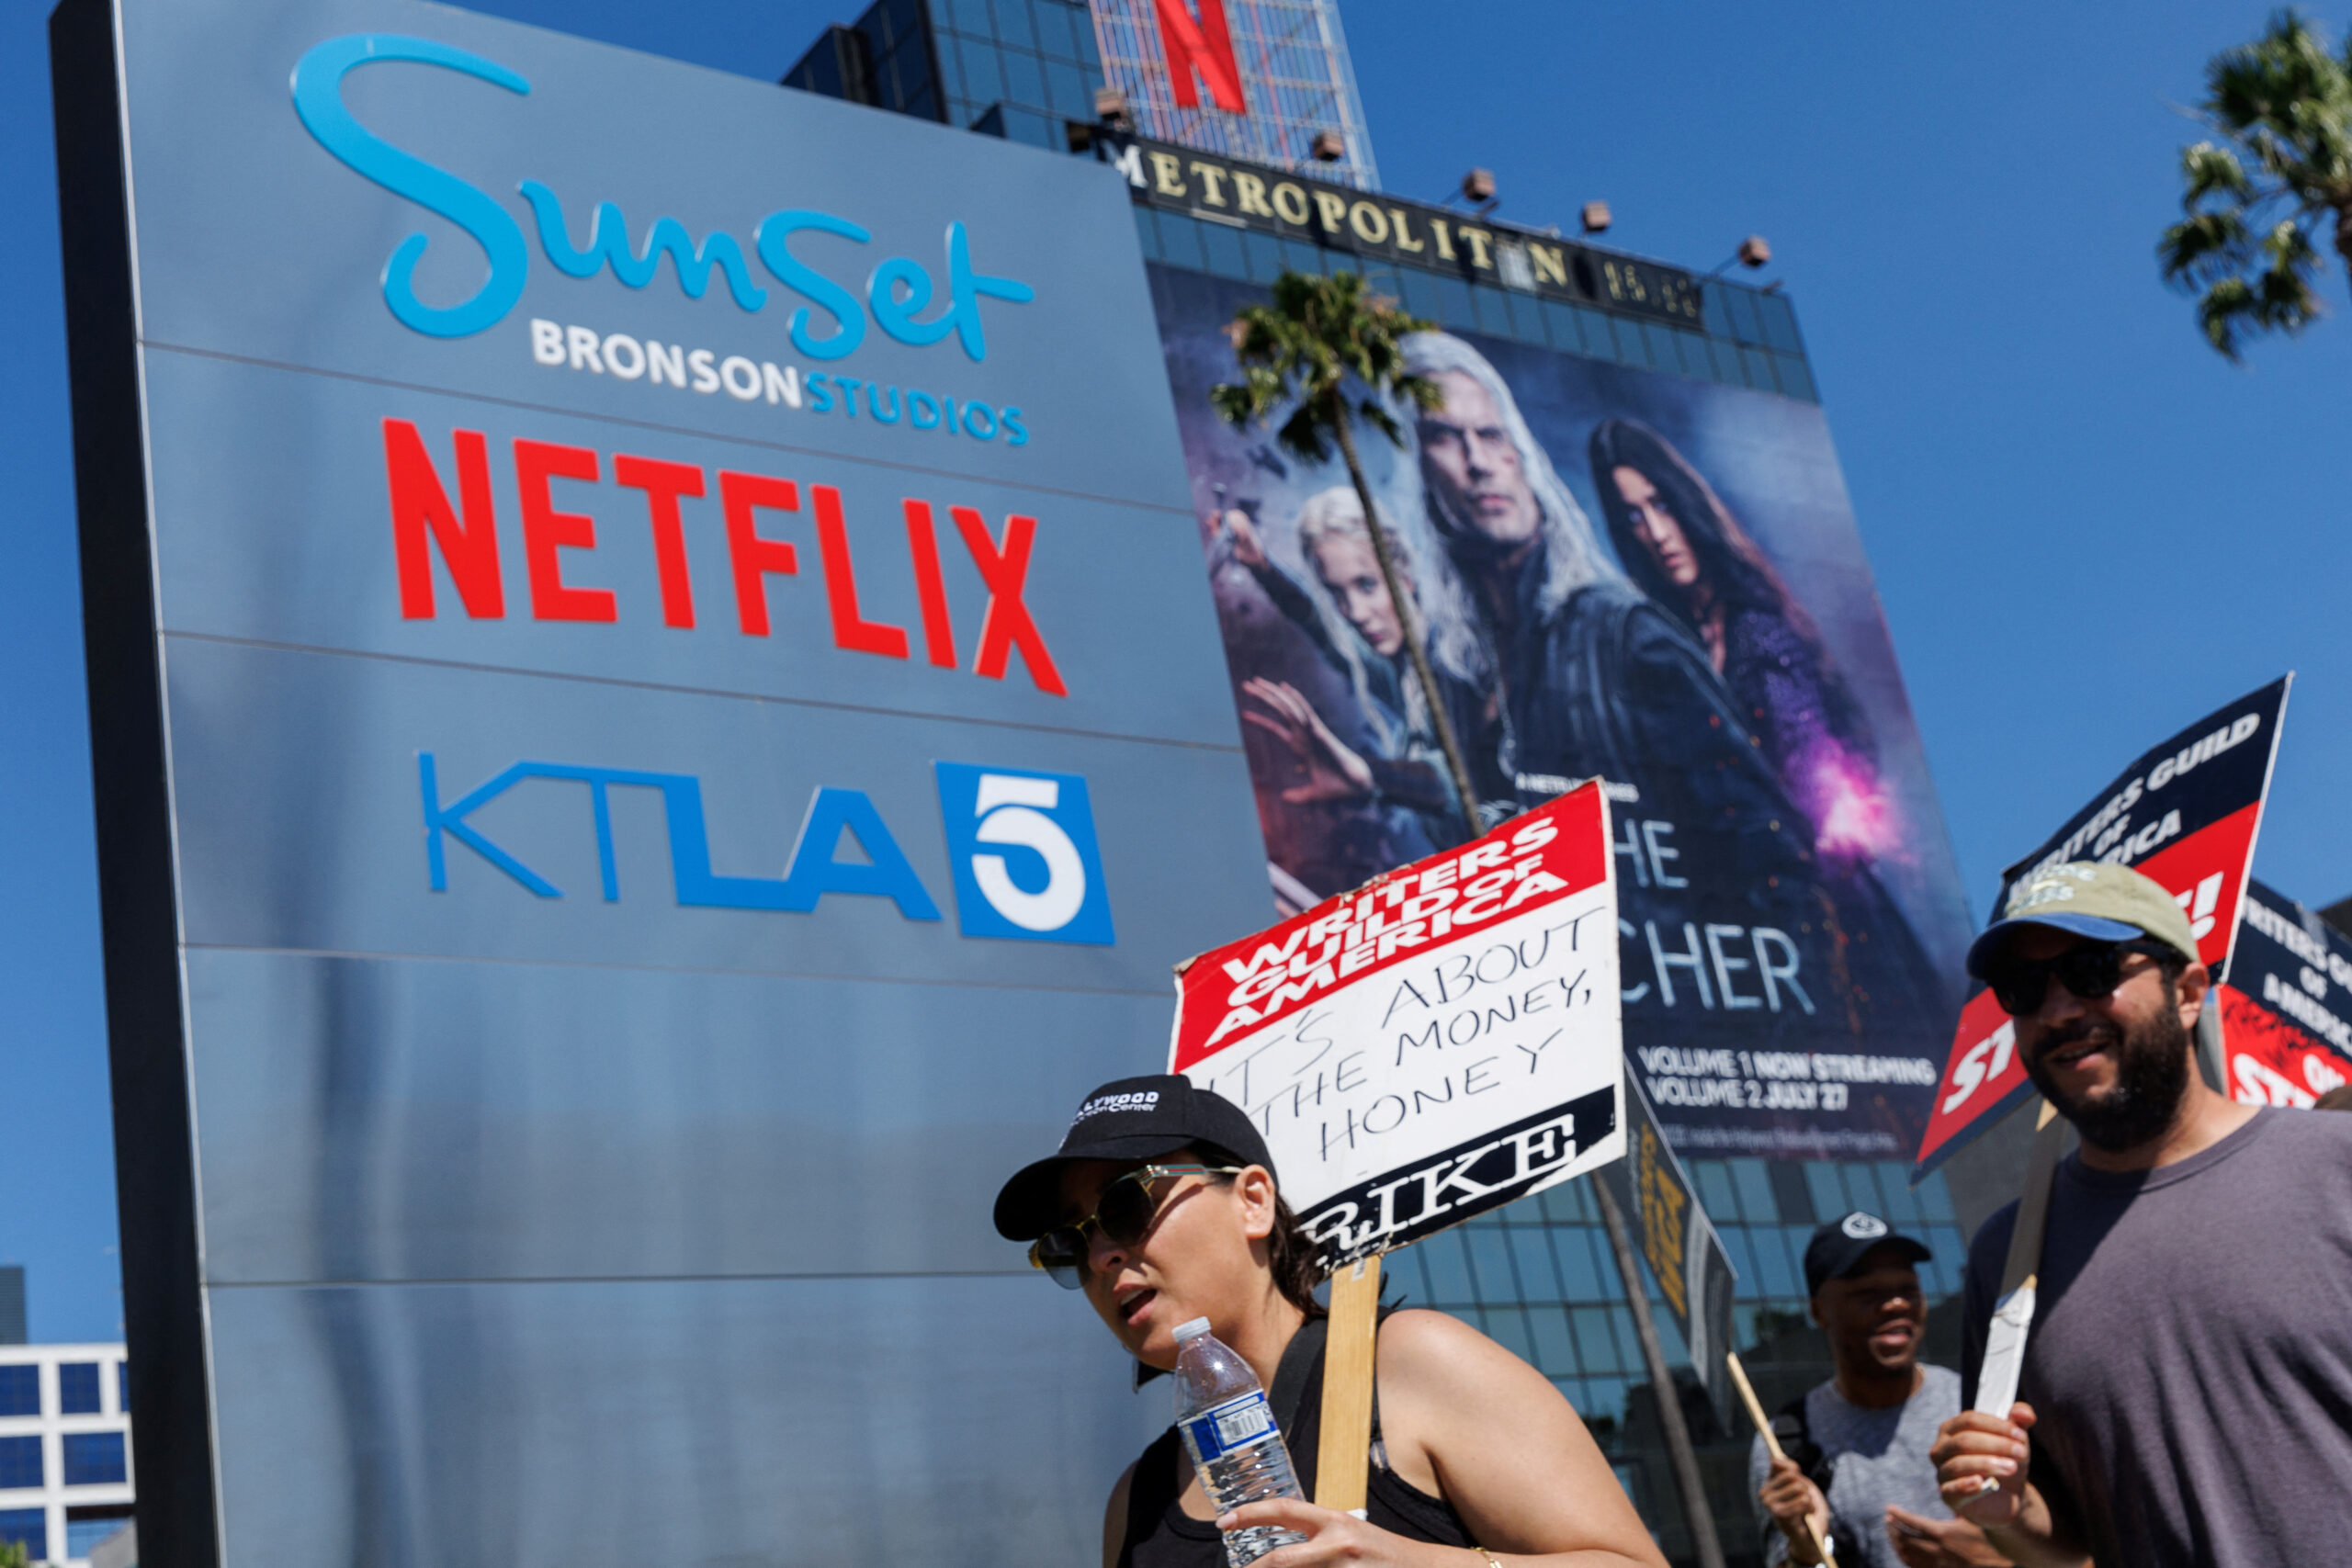 Hollywood Faces Turmoil as Actors Join Writers On Strike, Impacting Film Industry and Festival Circuit